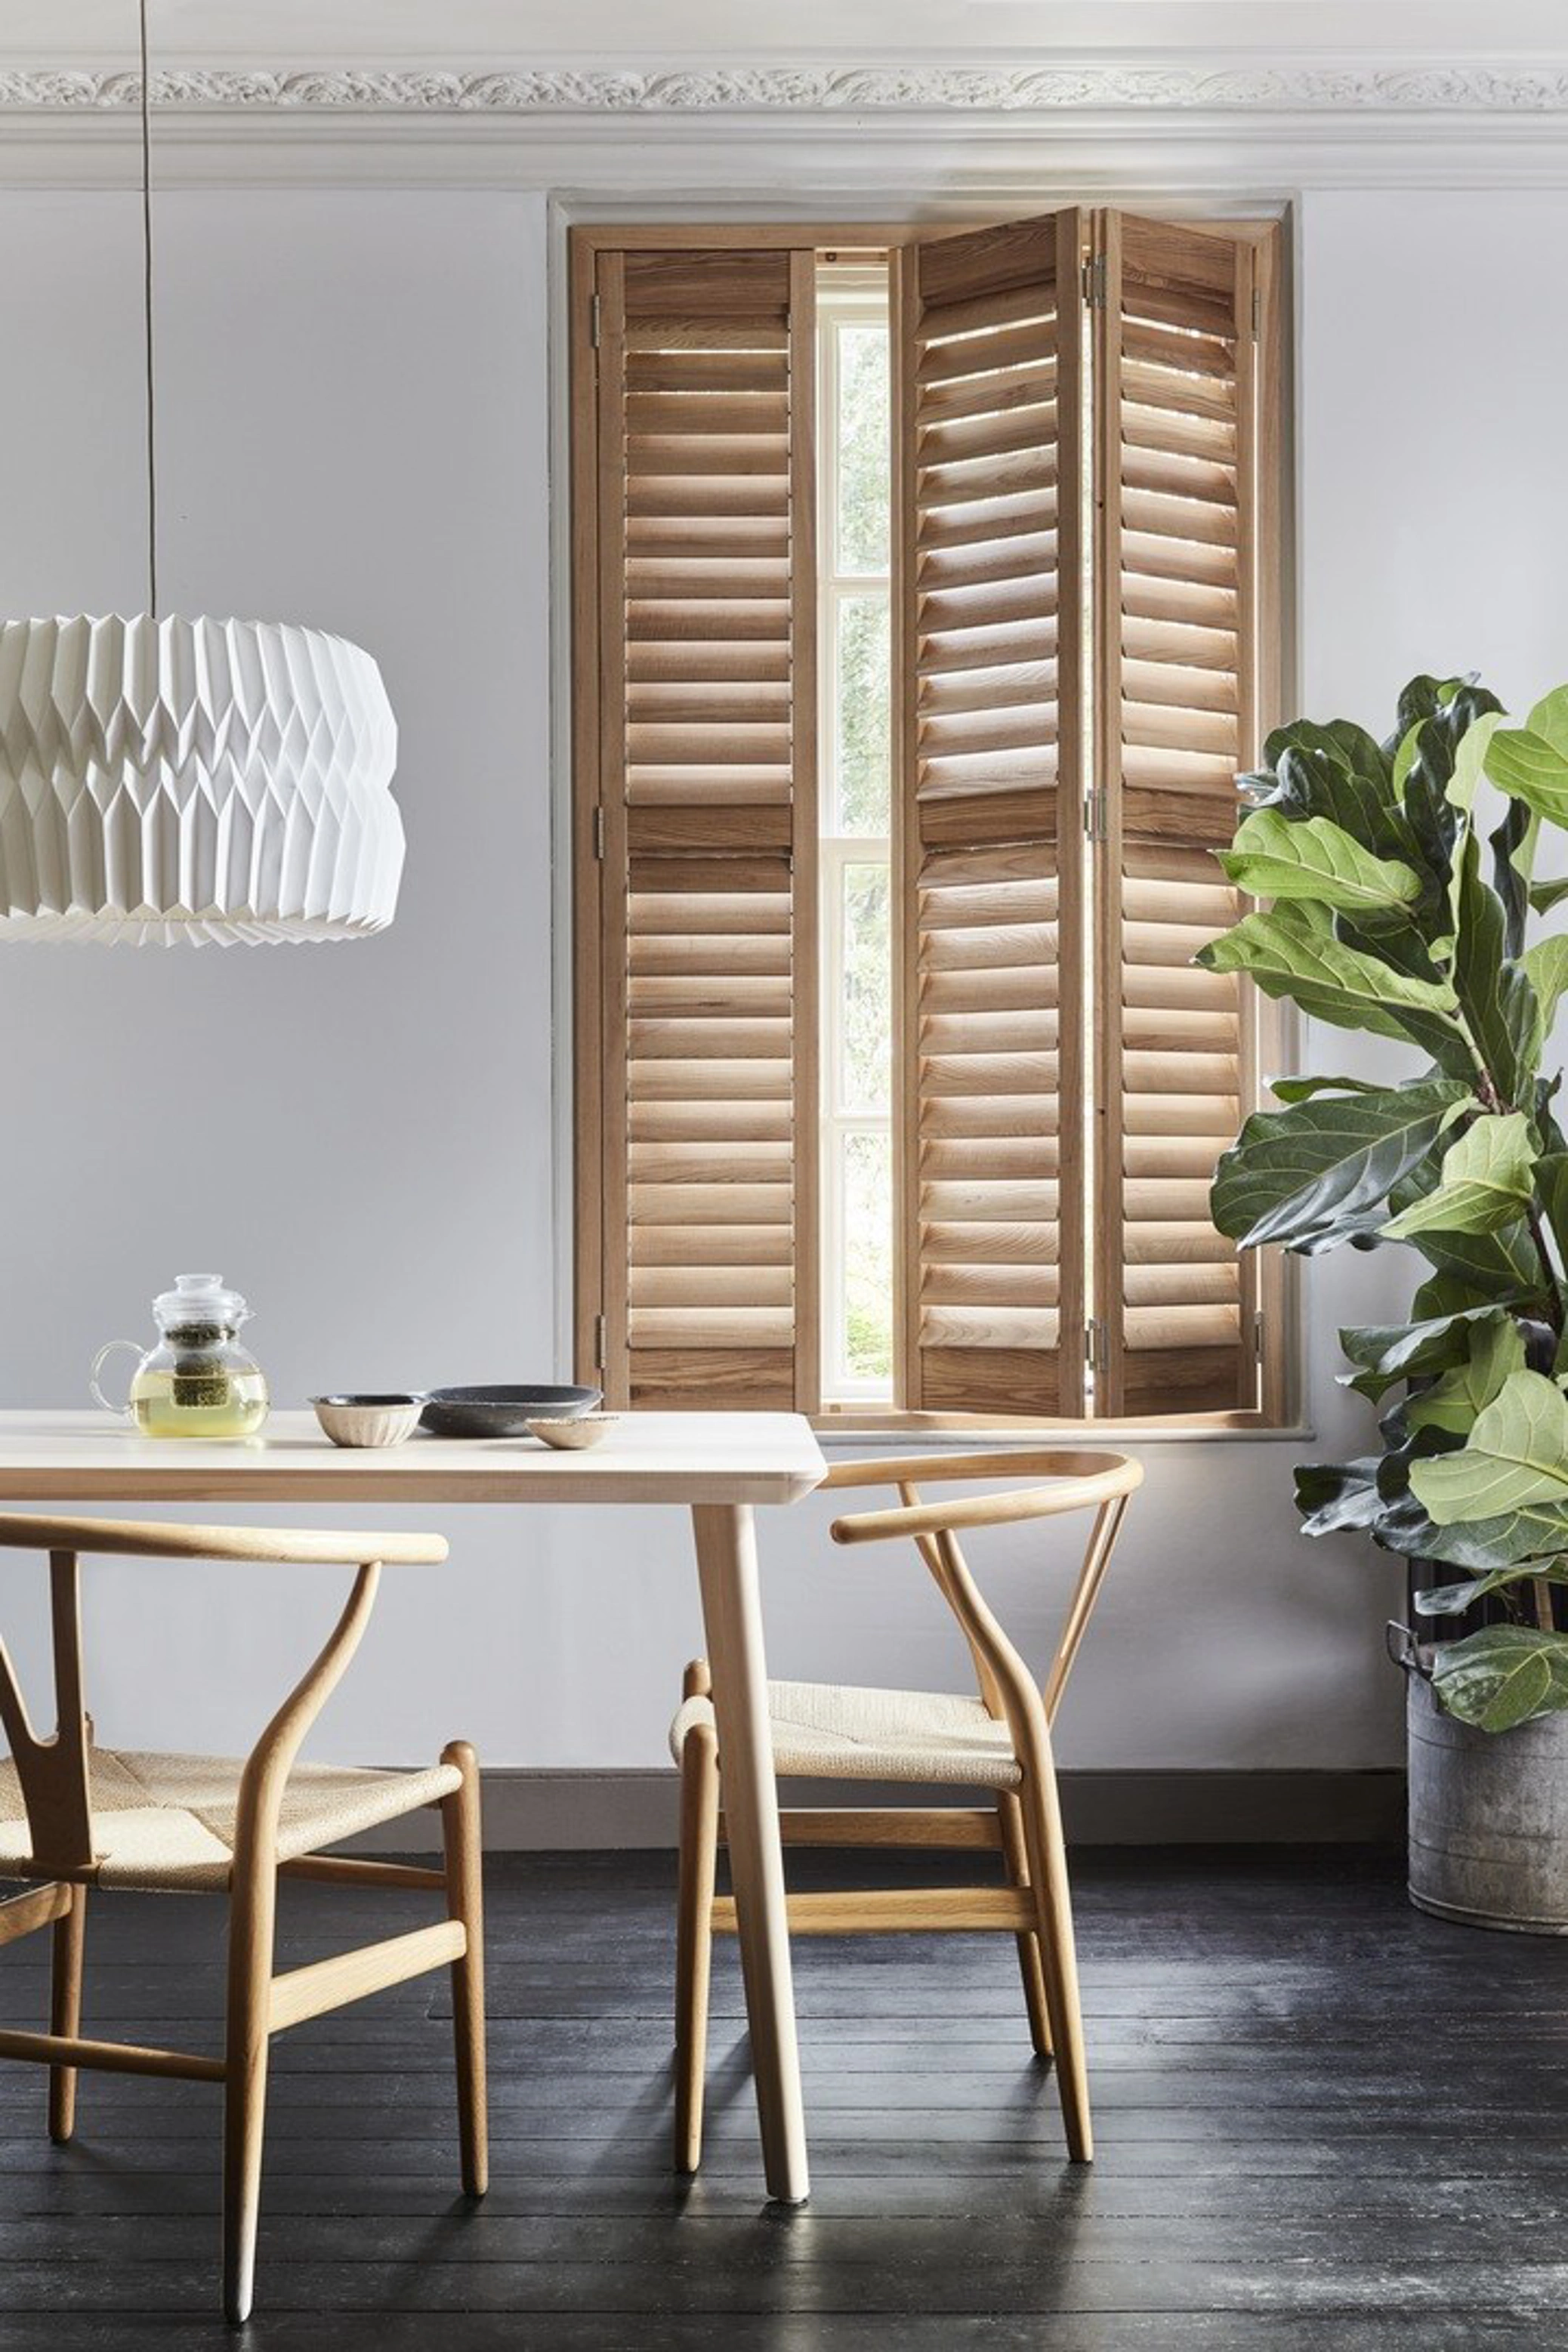 Honey Stained wooden shutters in dining room